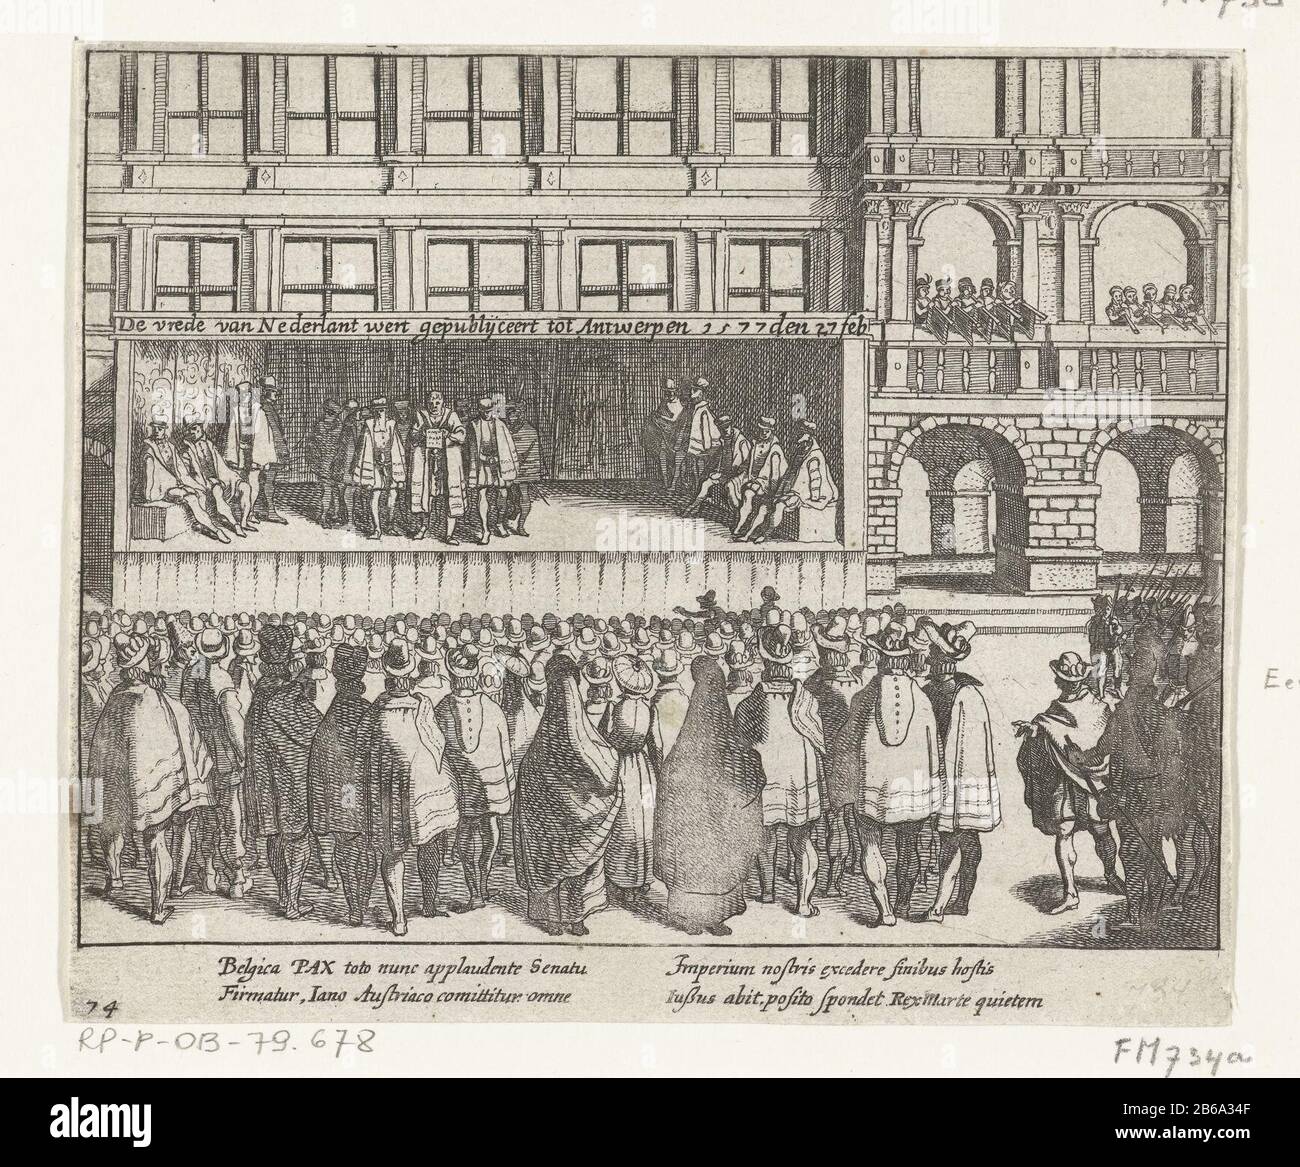 Promulgation of the Edict, 1577 Peace of Netherland wert gepublijceert to the 1577 Antwerp Feb 27 (title object) Promulgation of the Edict of the City Hall of Antwerp. On February 27, 1577 (the date indicated in the picture) the Edict Antwerp was promulgated. Herein, the governor Don Giovanni confirmed the acts defined in the pacification of Ghent (drawn on November 8, 1576). At a stage before the town hall, the peace of the listeners present disclosed and read out. With signature of four lines in Latin. Numbered 74. Printed on the back with text in Latijn. Manufacturer : printmaker Simon Fris Stock Photo